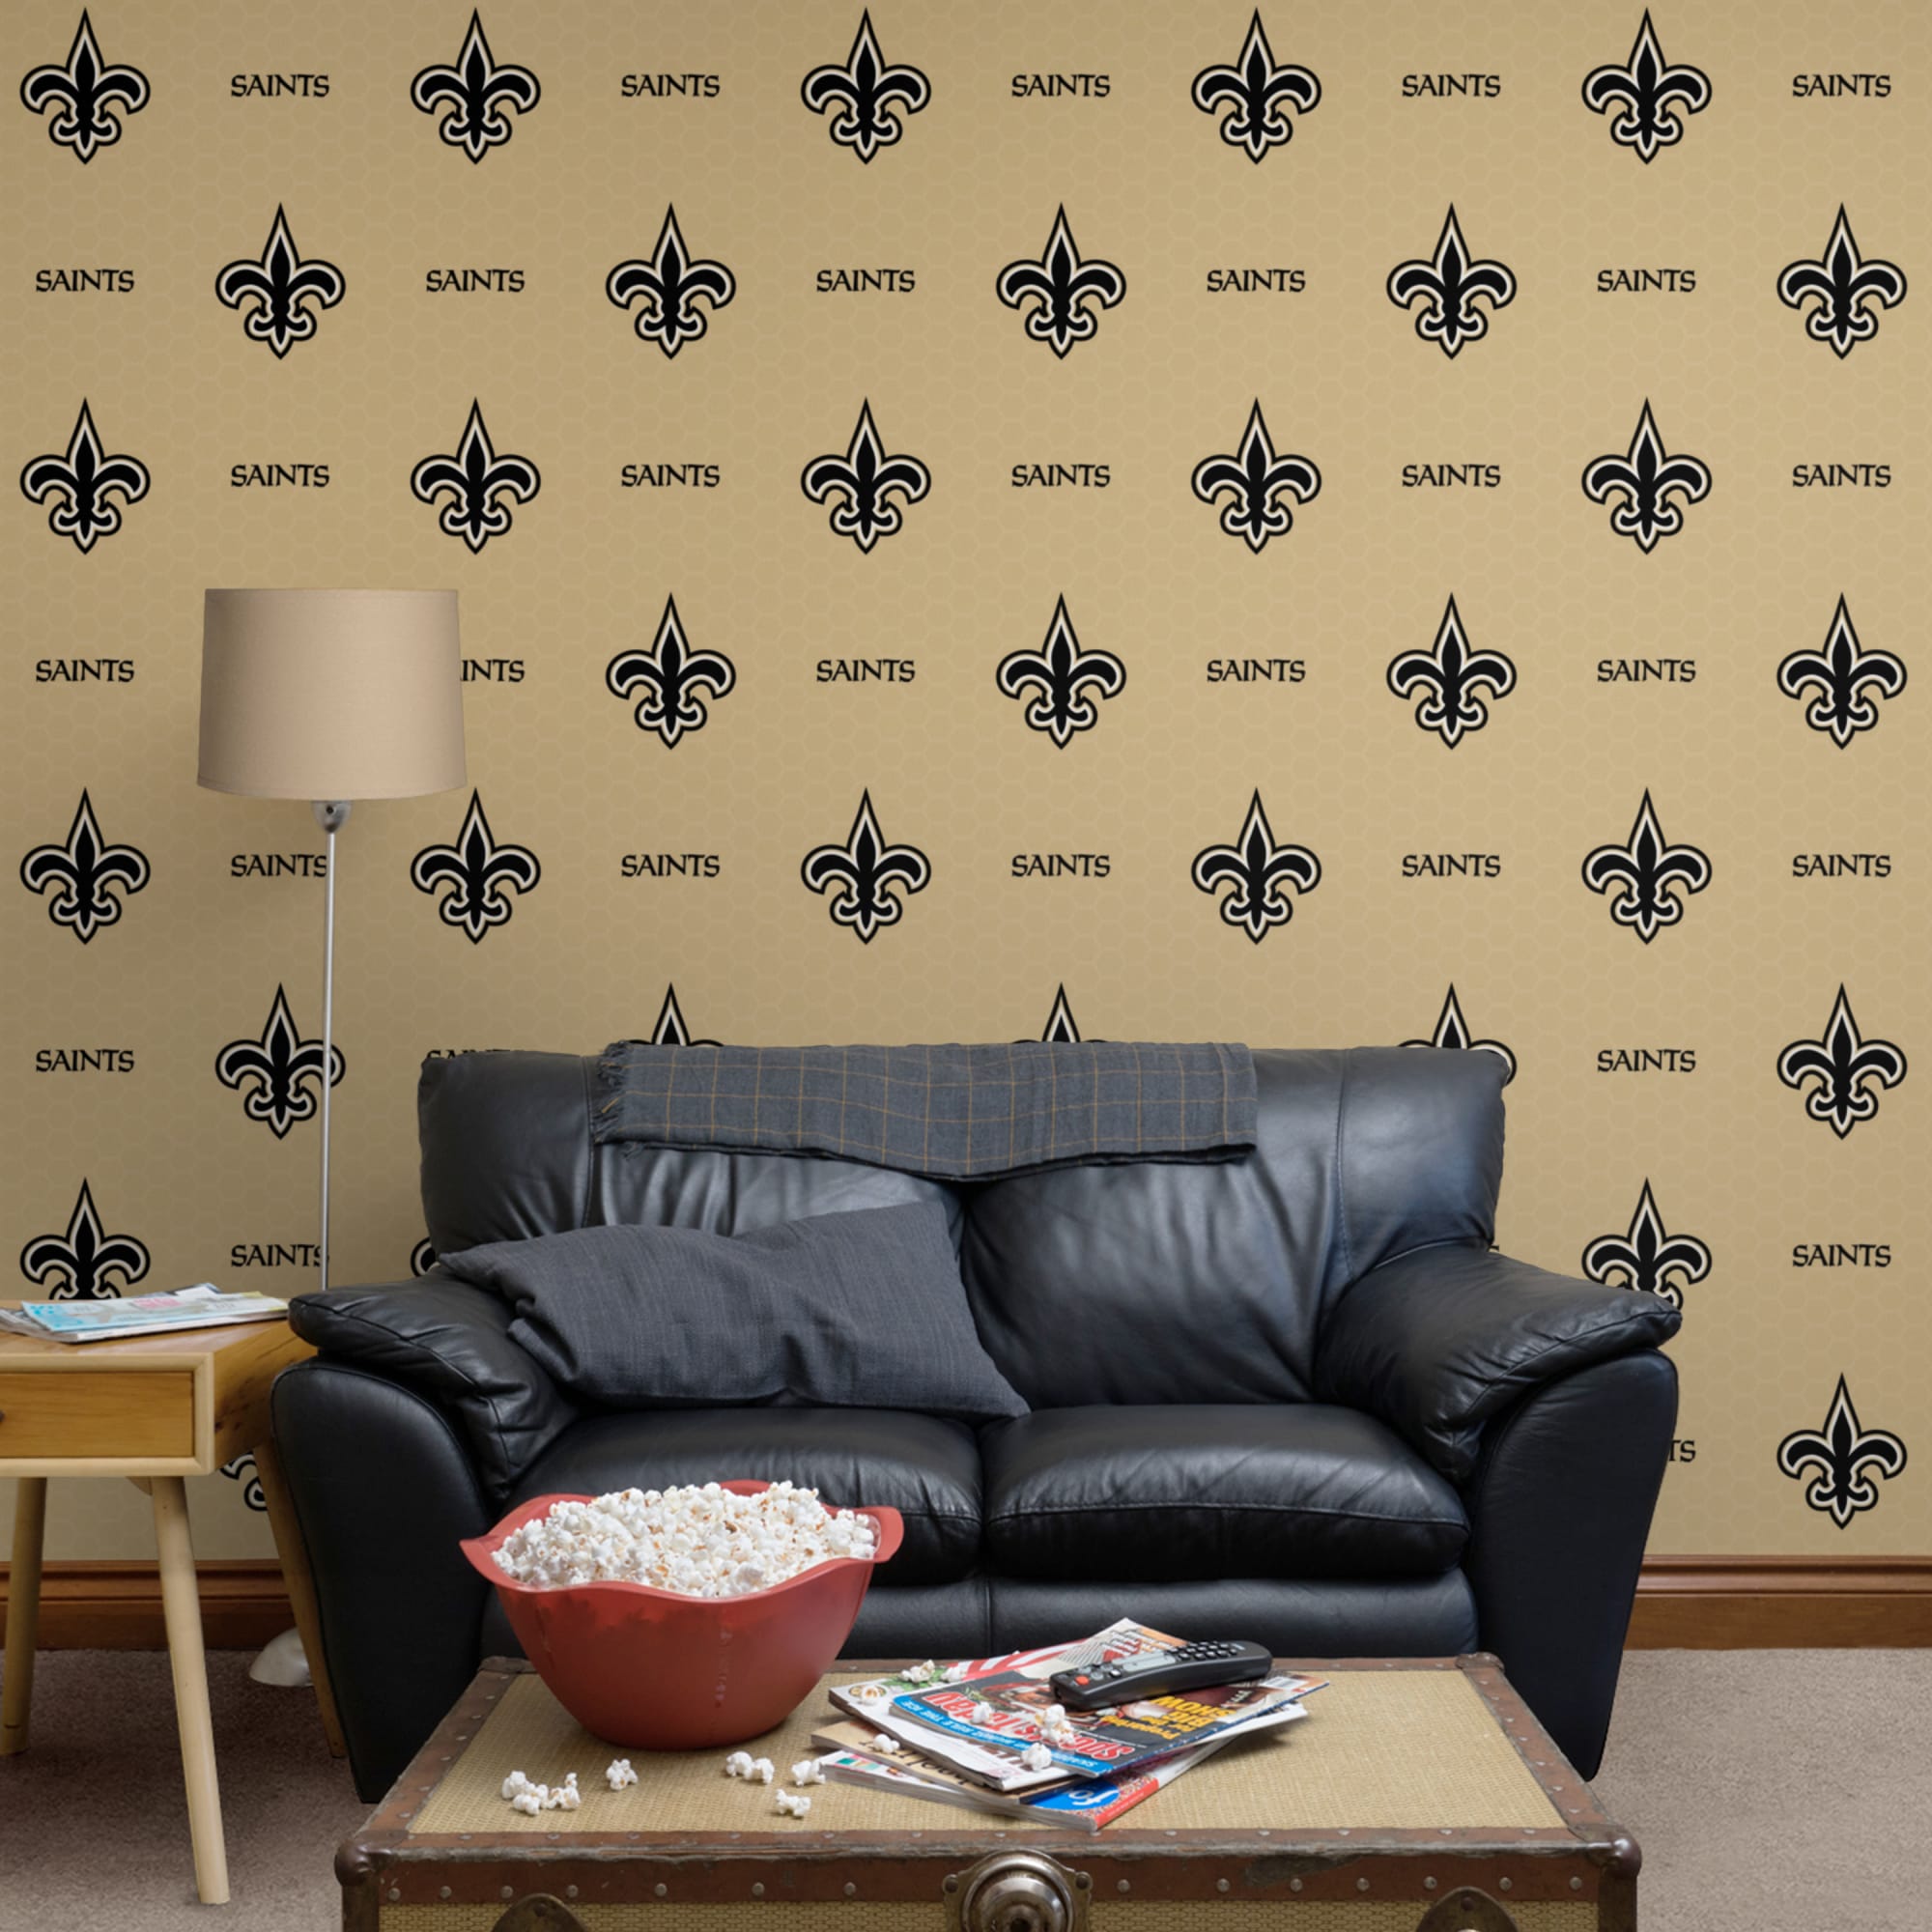 New Orleans Saints: Logo Pattern - Officially Licensed NFL Removable Wallpaper 12" x 12" Sample by Fathead